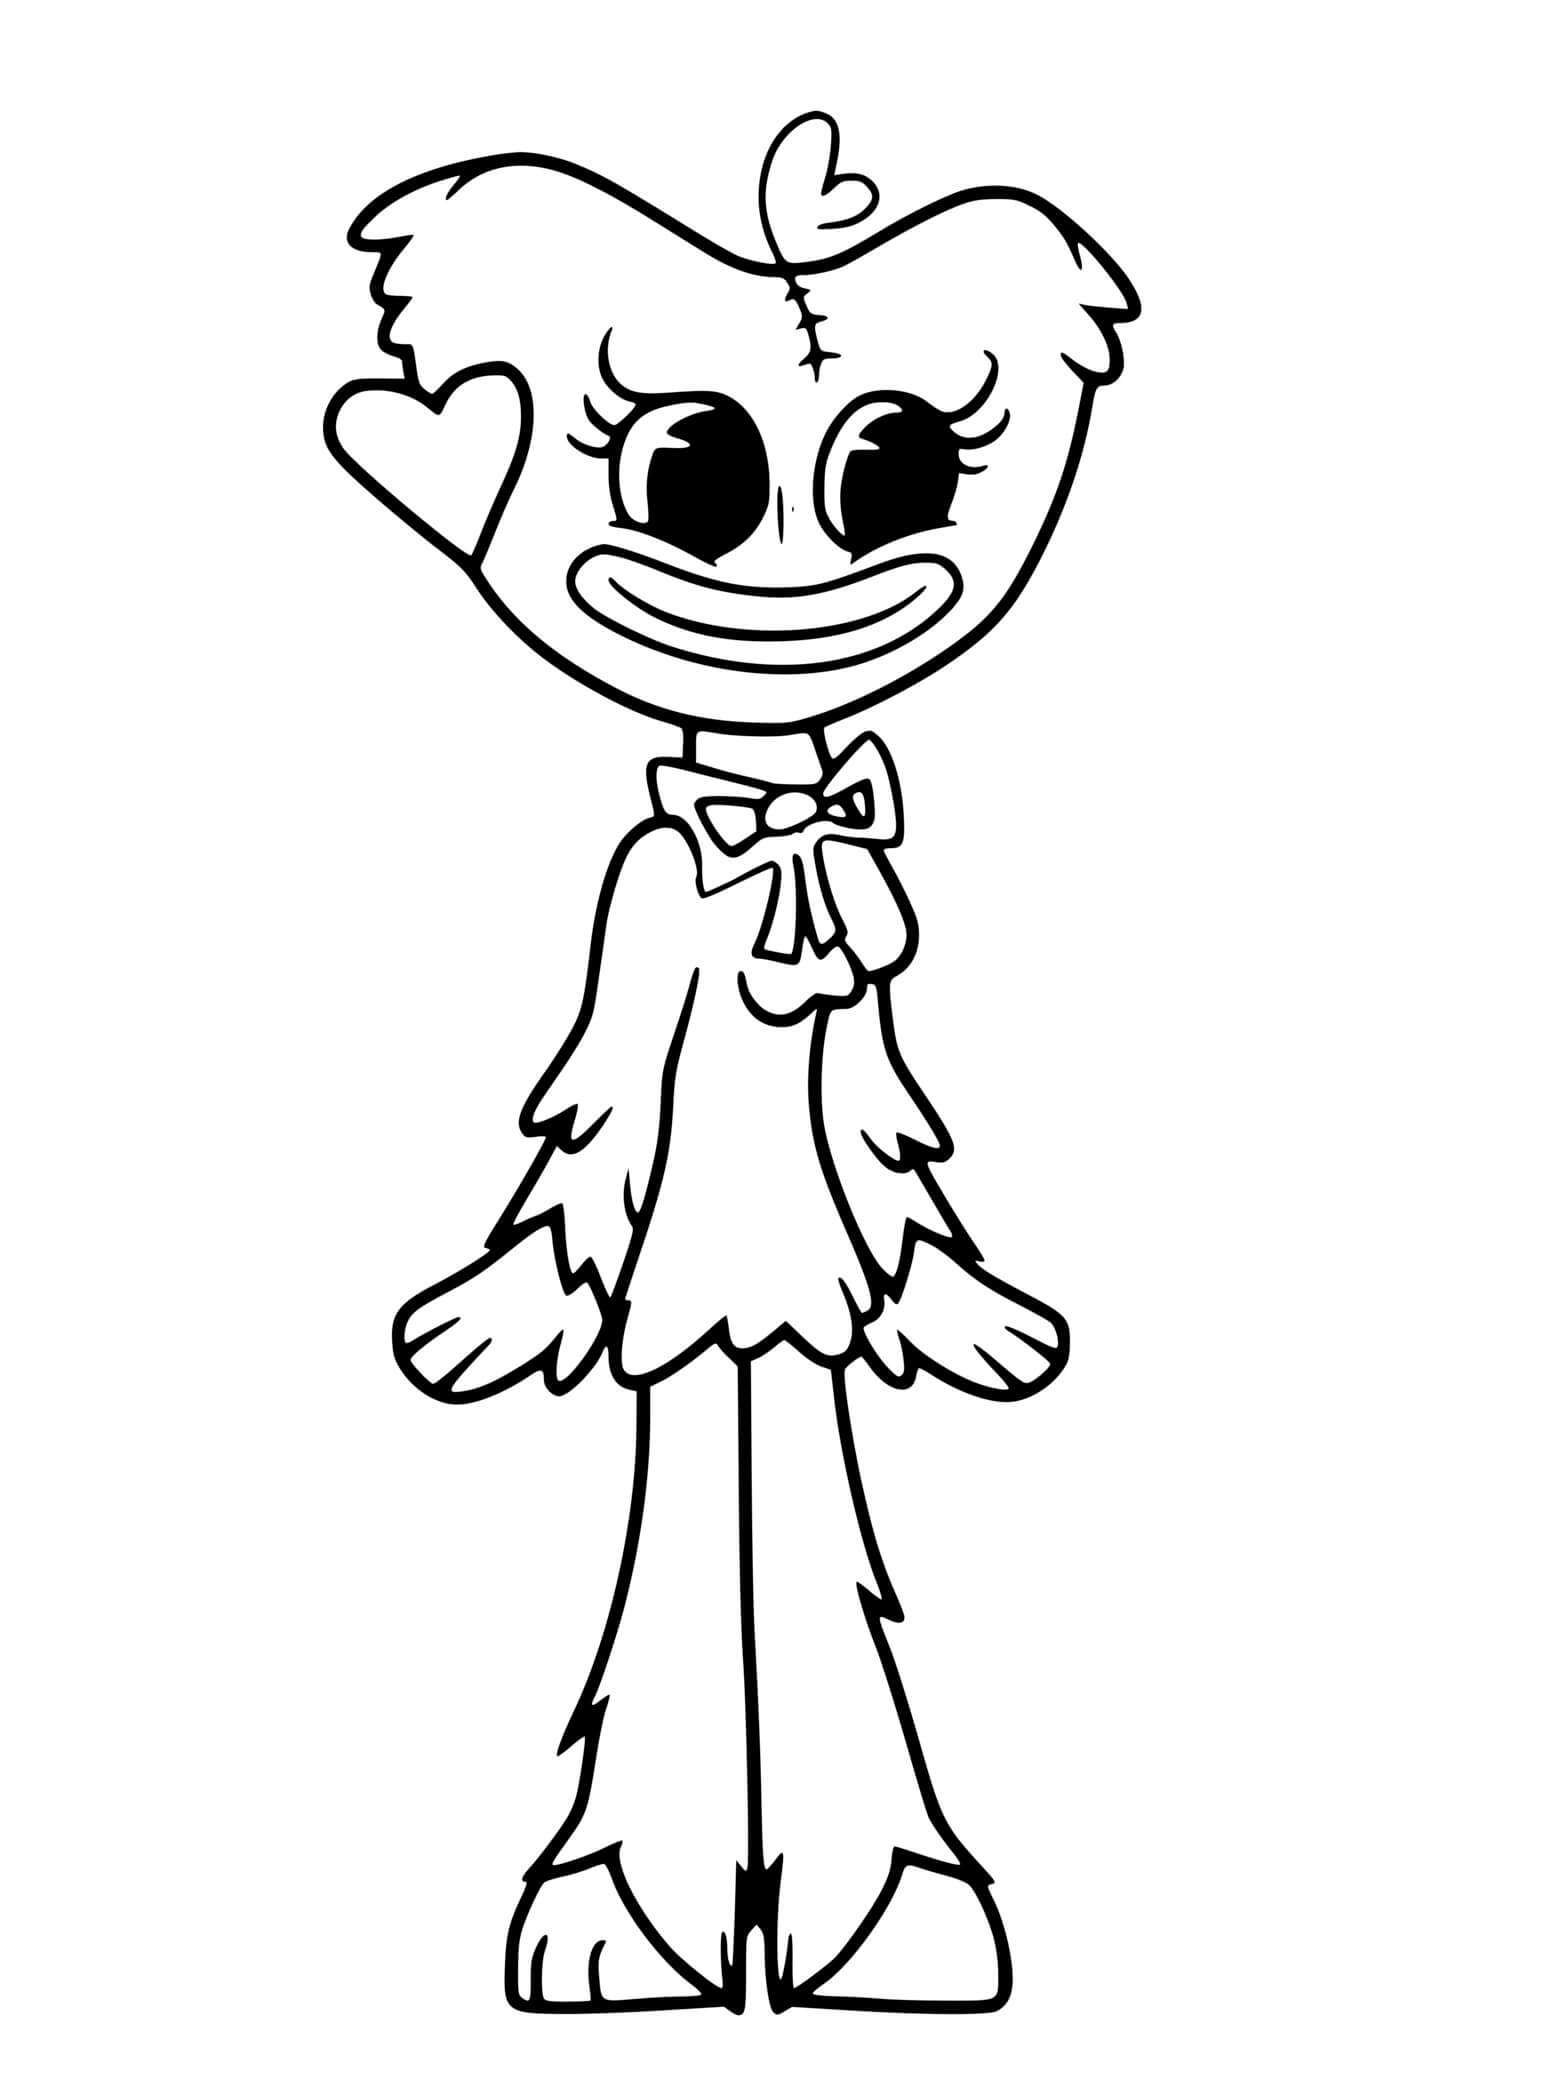 Huggy Wuggy Shows His Tongue Coloring Page pour Dessin A Imprimer Huggy Wuggy